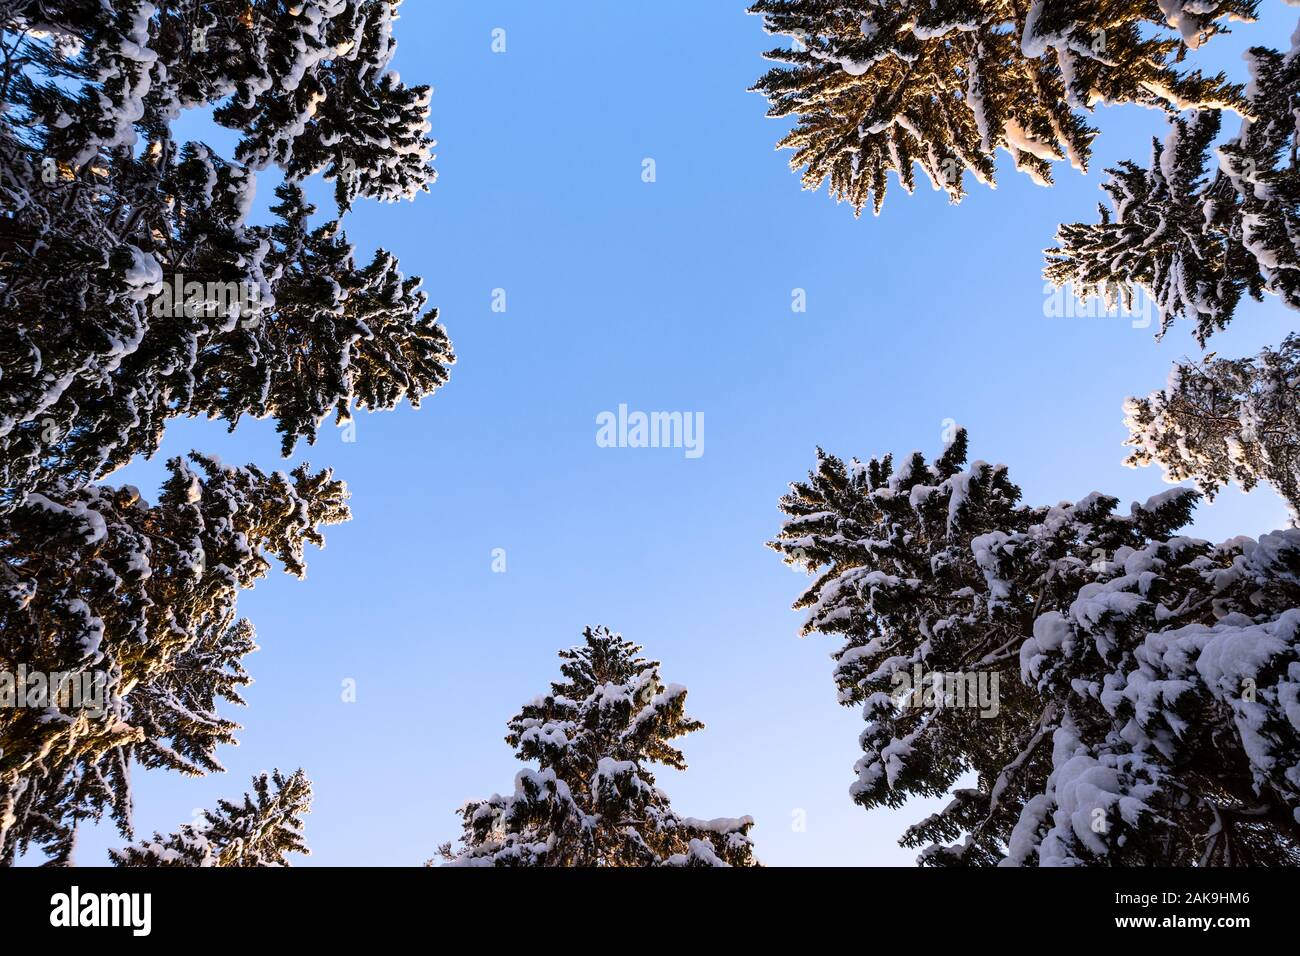 Winter forest, tall spruce trees (Picea abies) covered with snow against clear blue sky Stock Photo